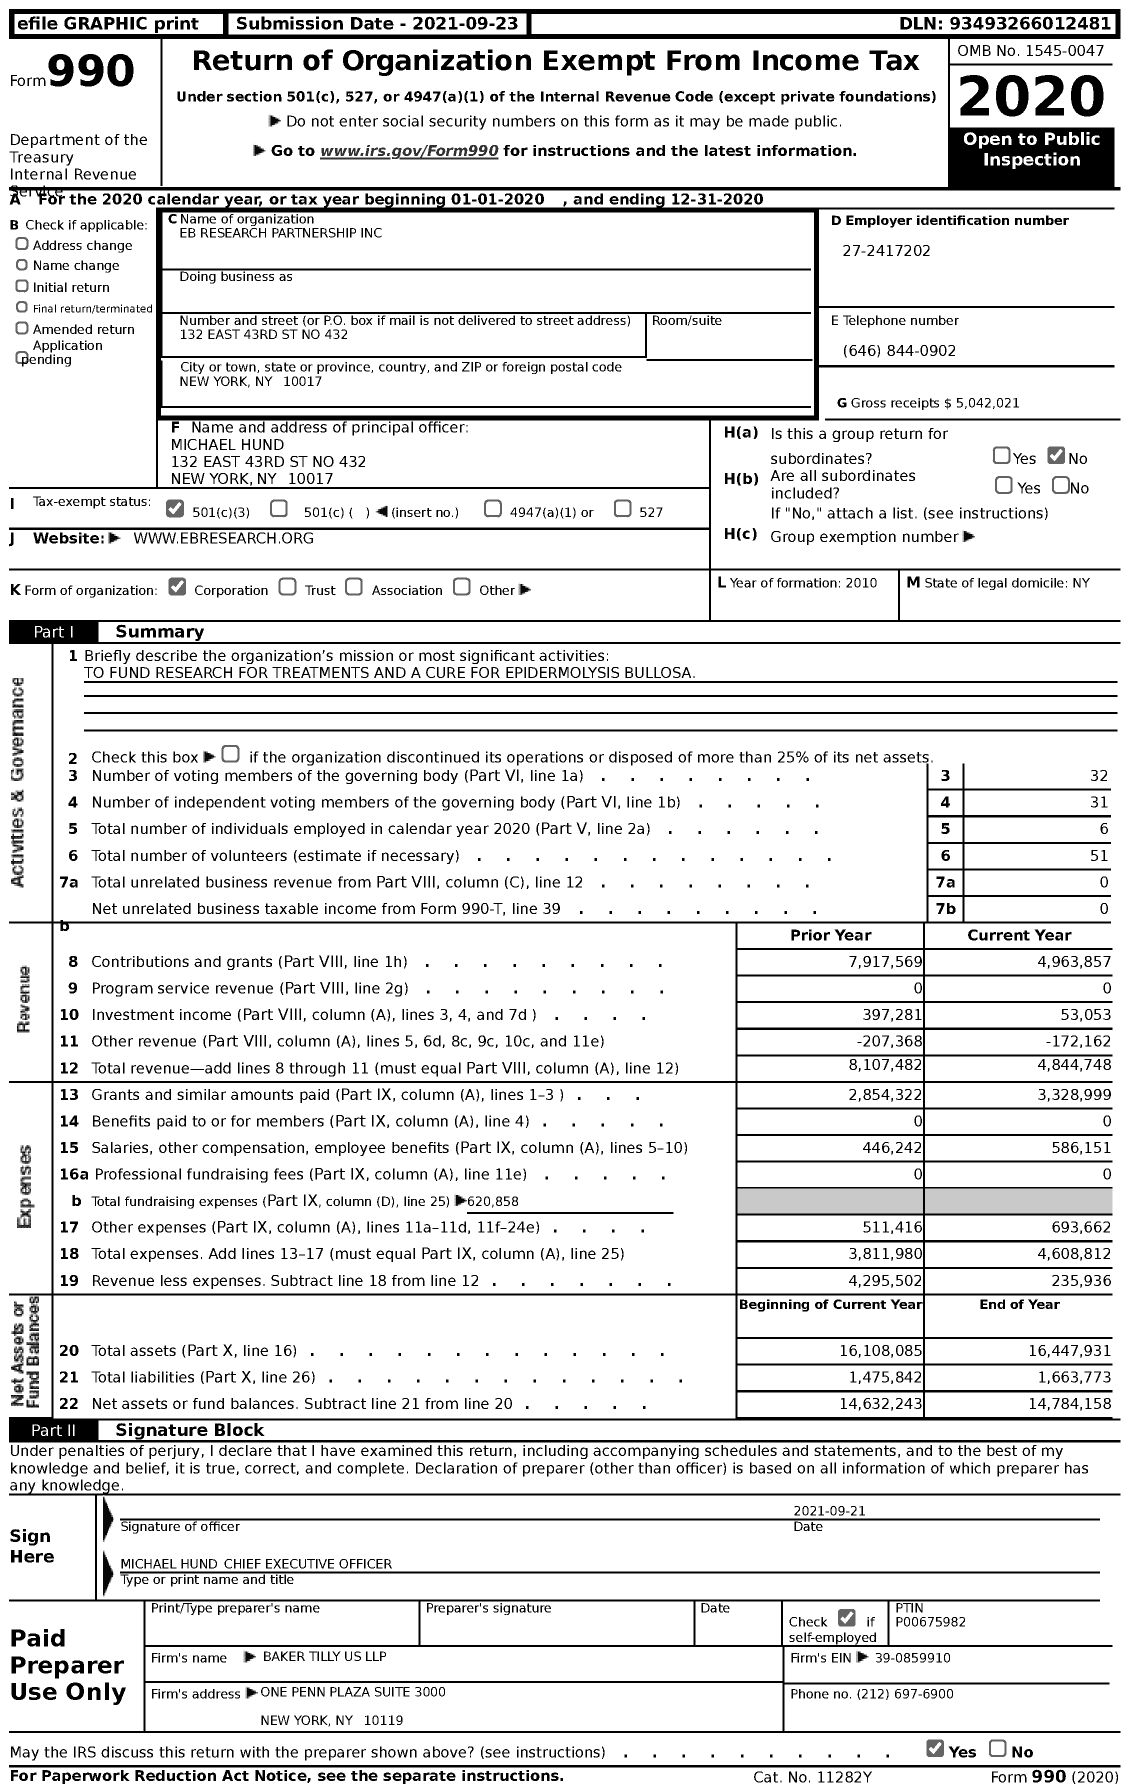 Image of first page of 2020 Form 990 for EB Research Partnership